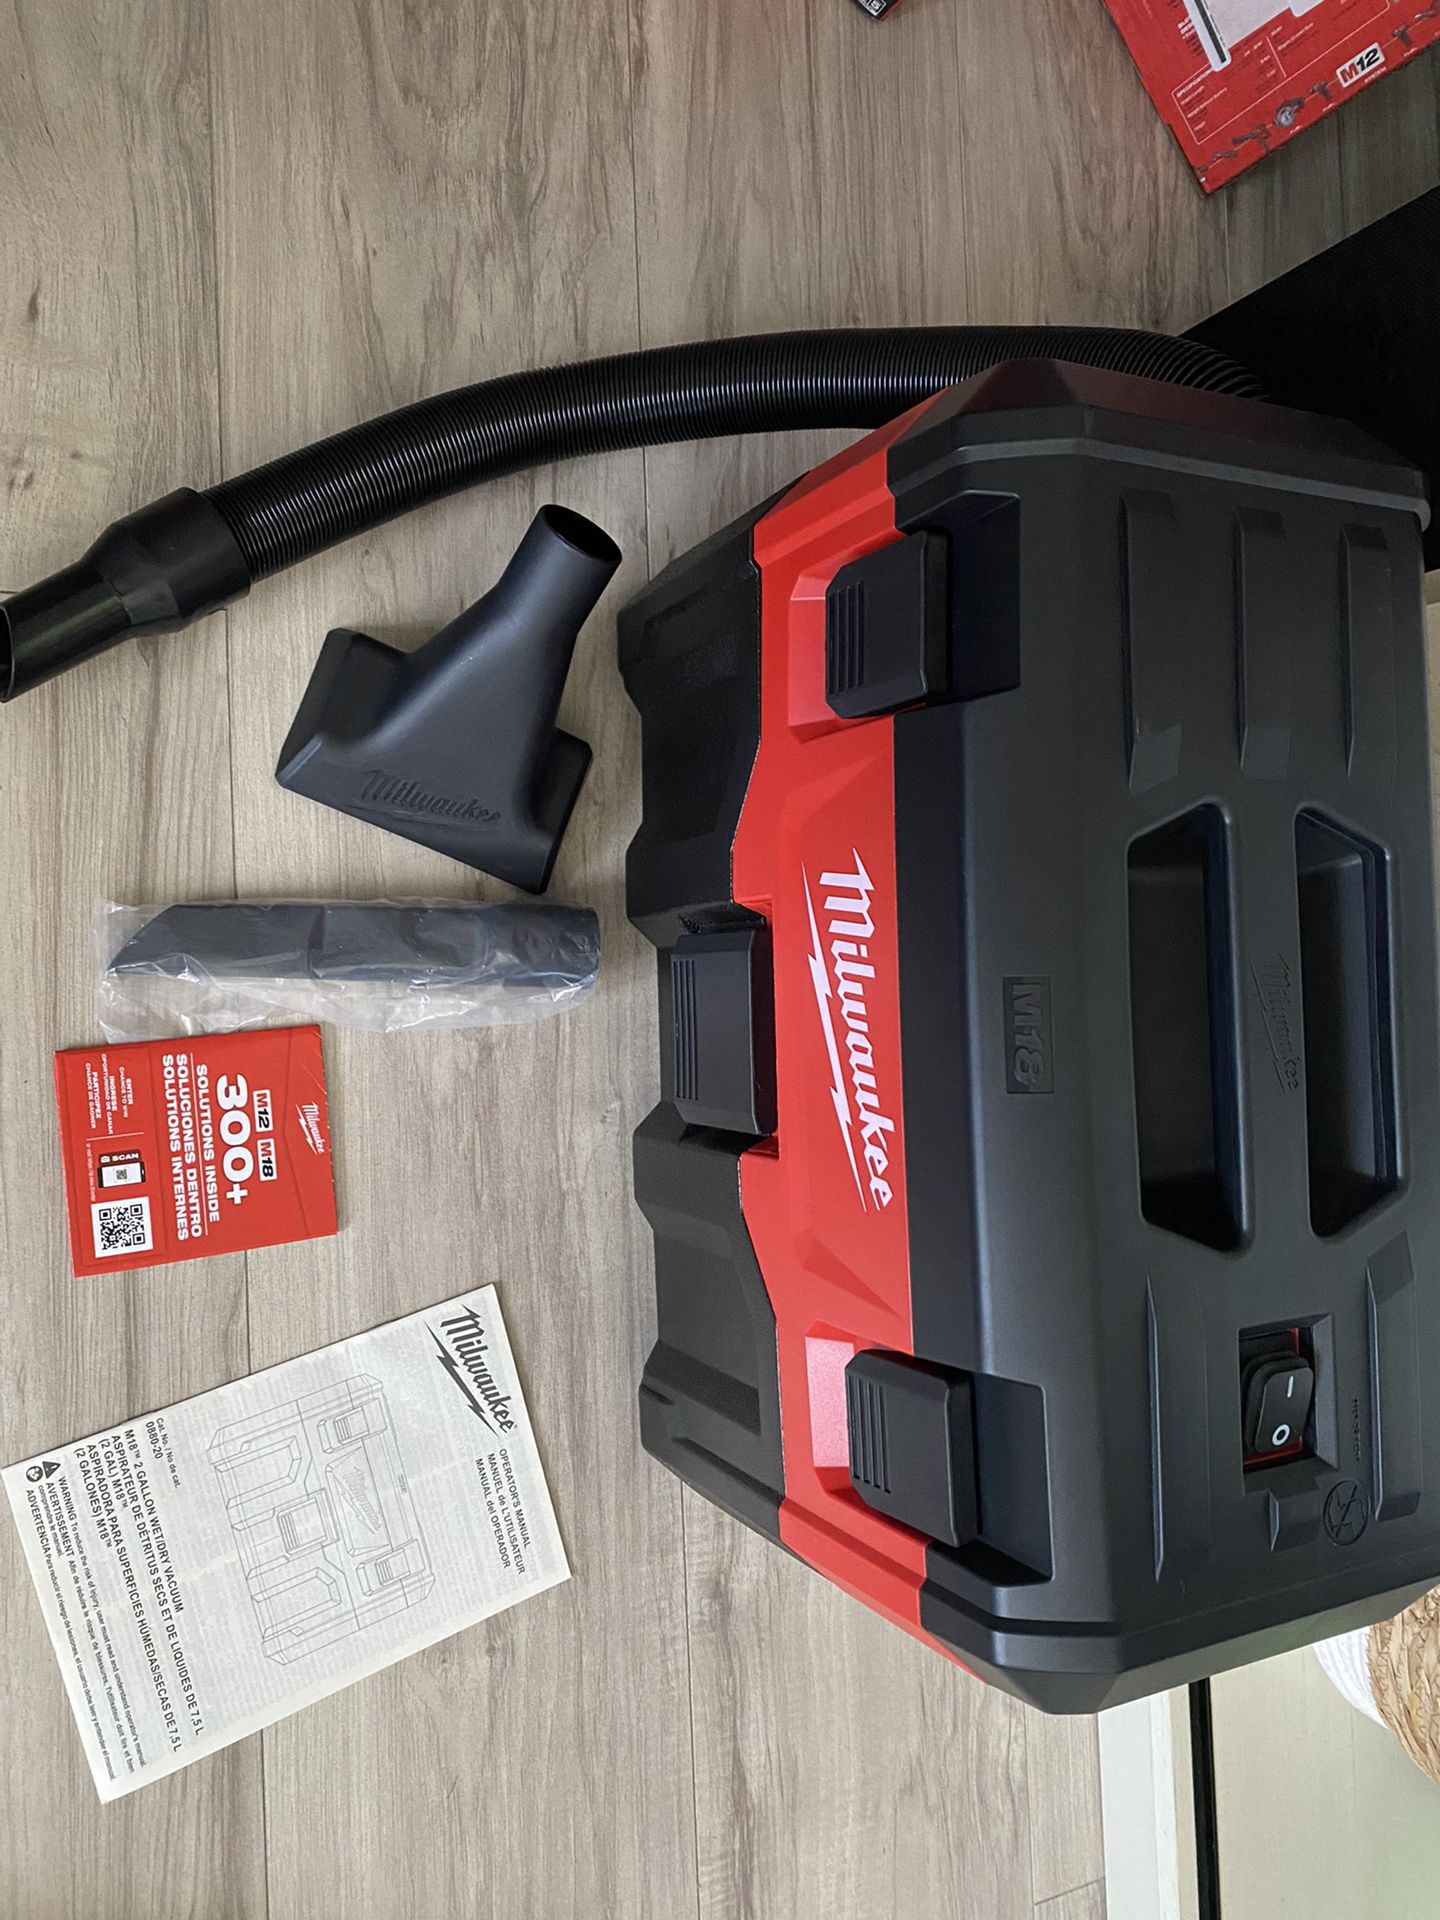 Milwaukee M18 18-Volt 2 Gal. Lithium-Ion Cordless Wet/Dry Vacuum (Tool-Only)